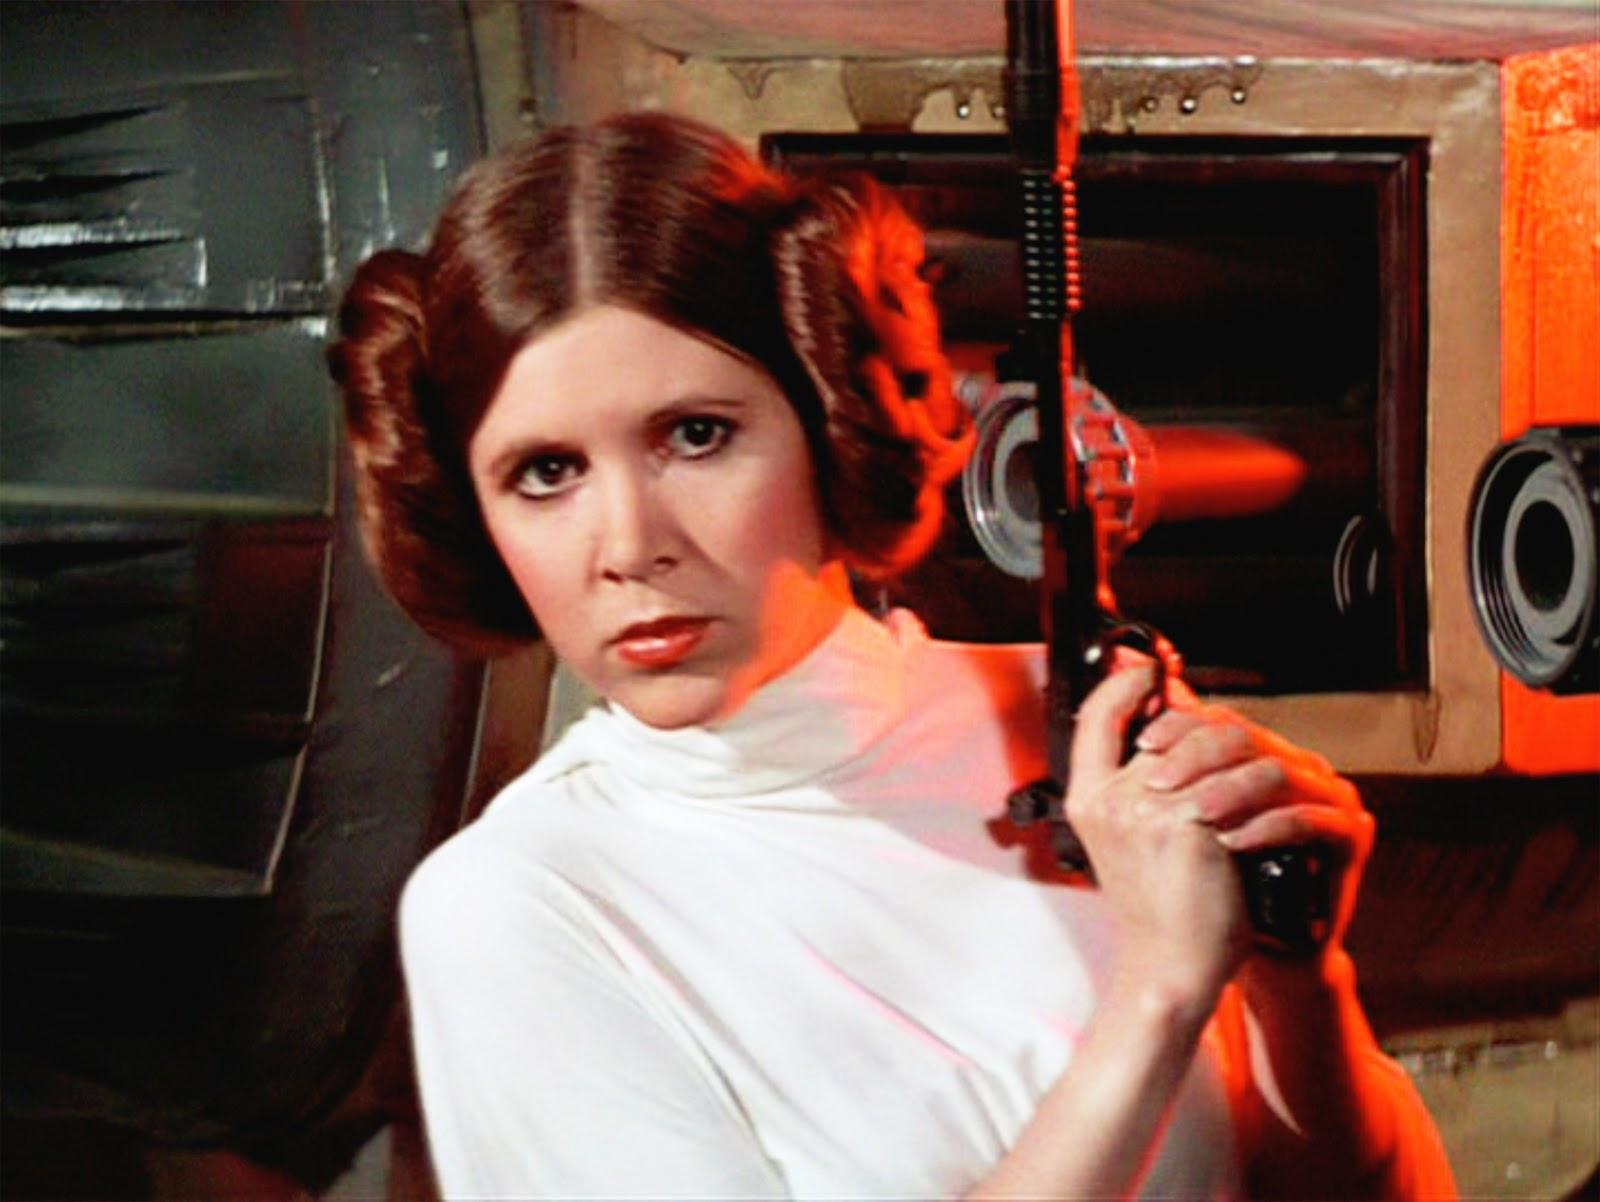 Carrie Fisher as Princess Leia in the 'Star Wars' film franchise